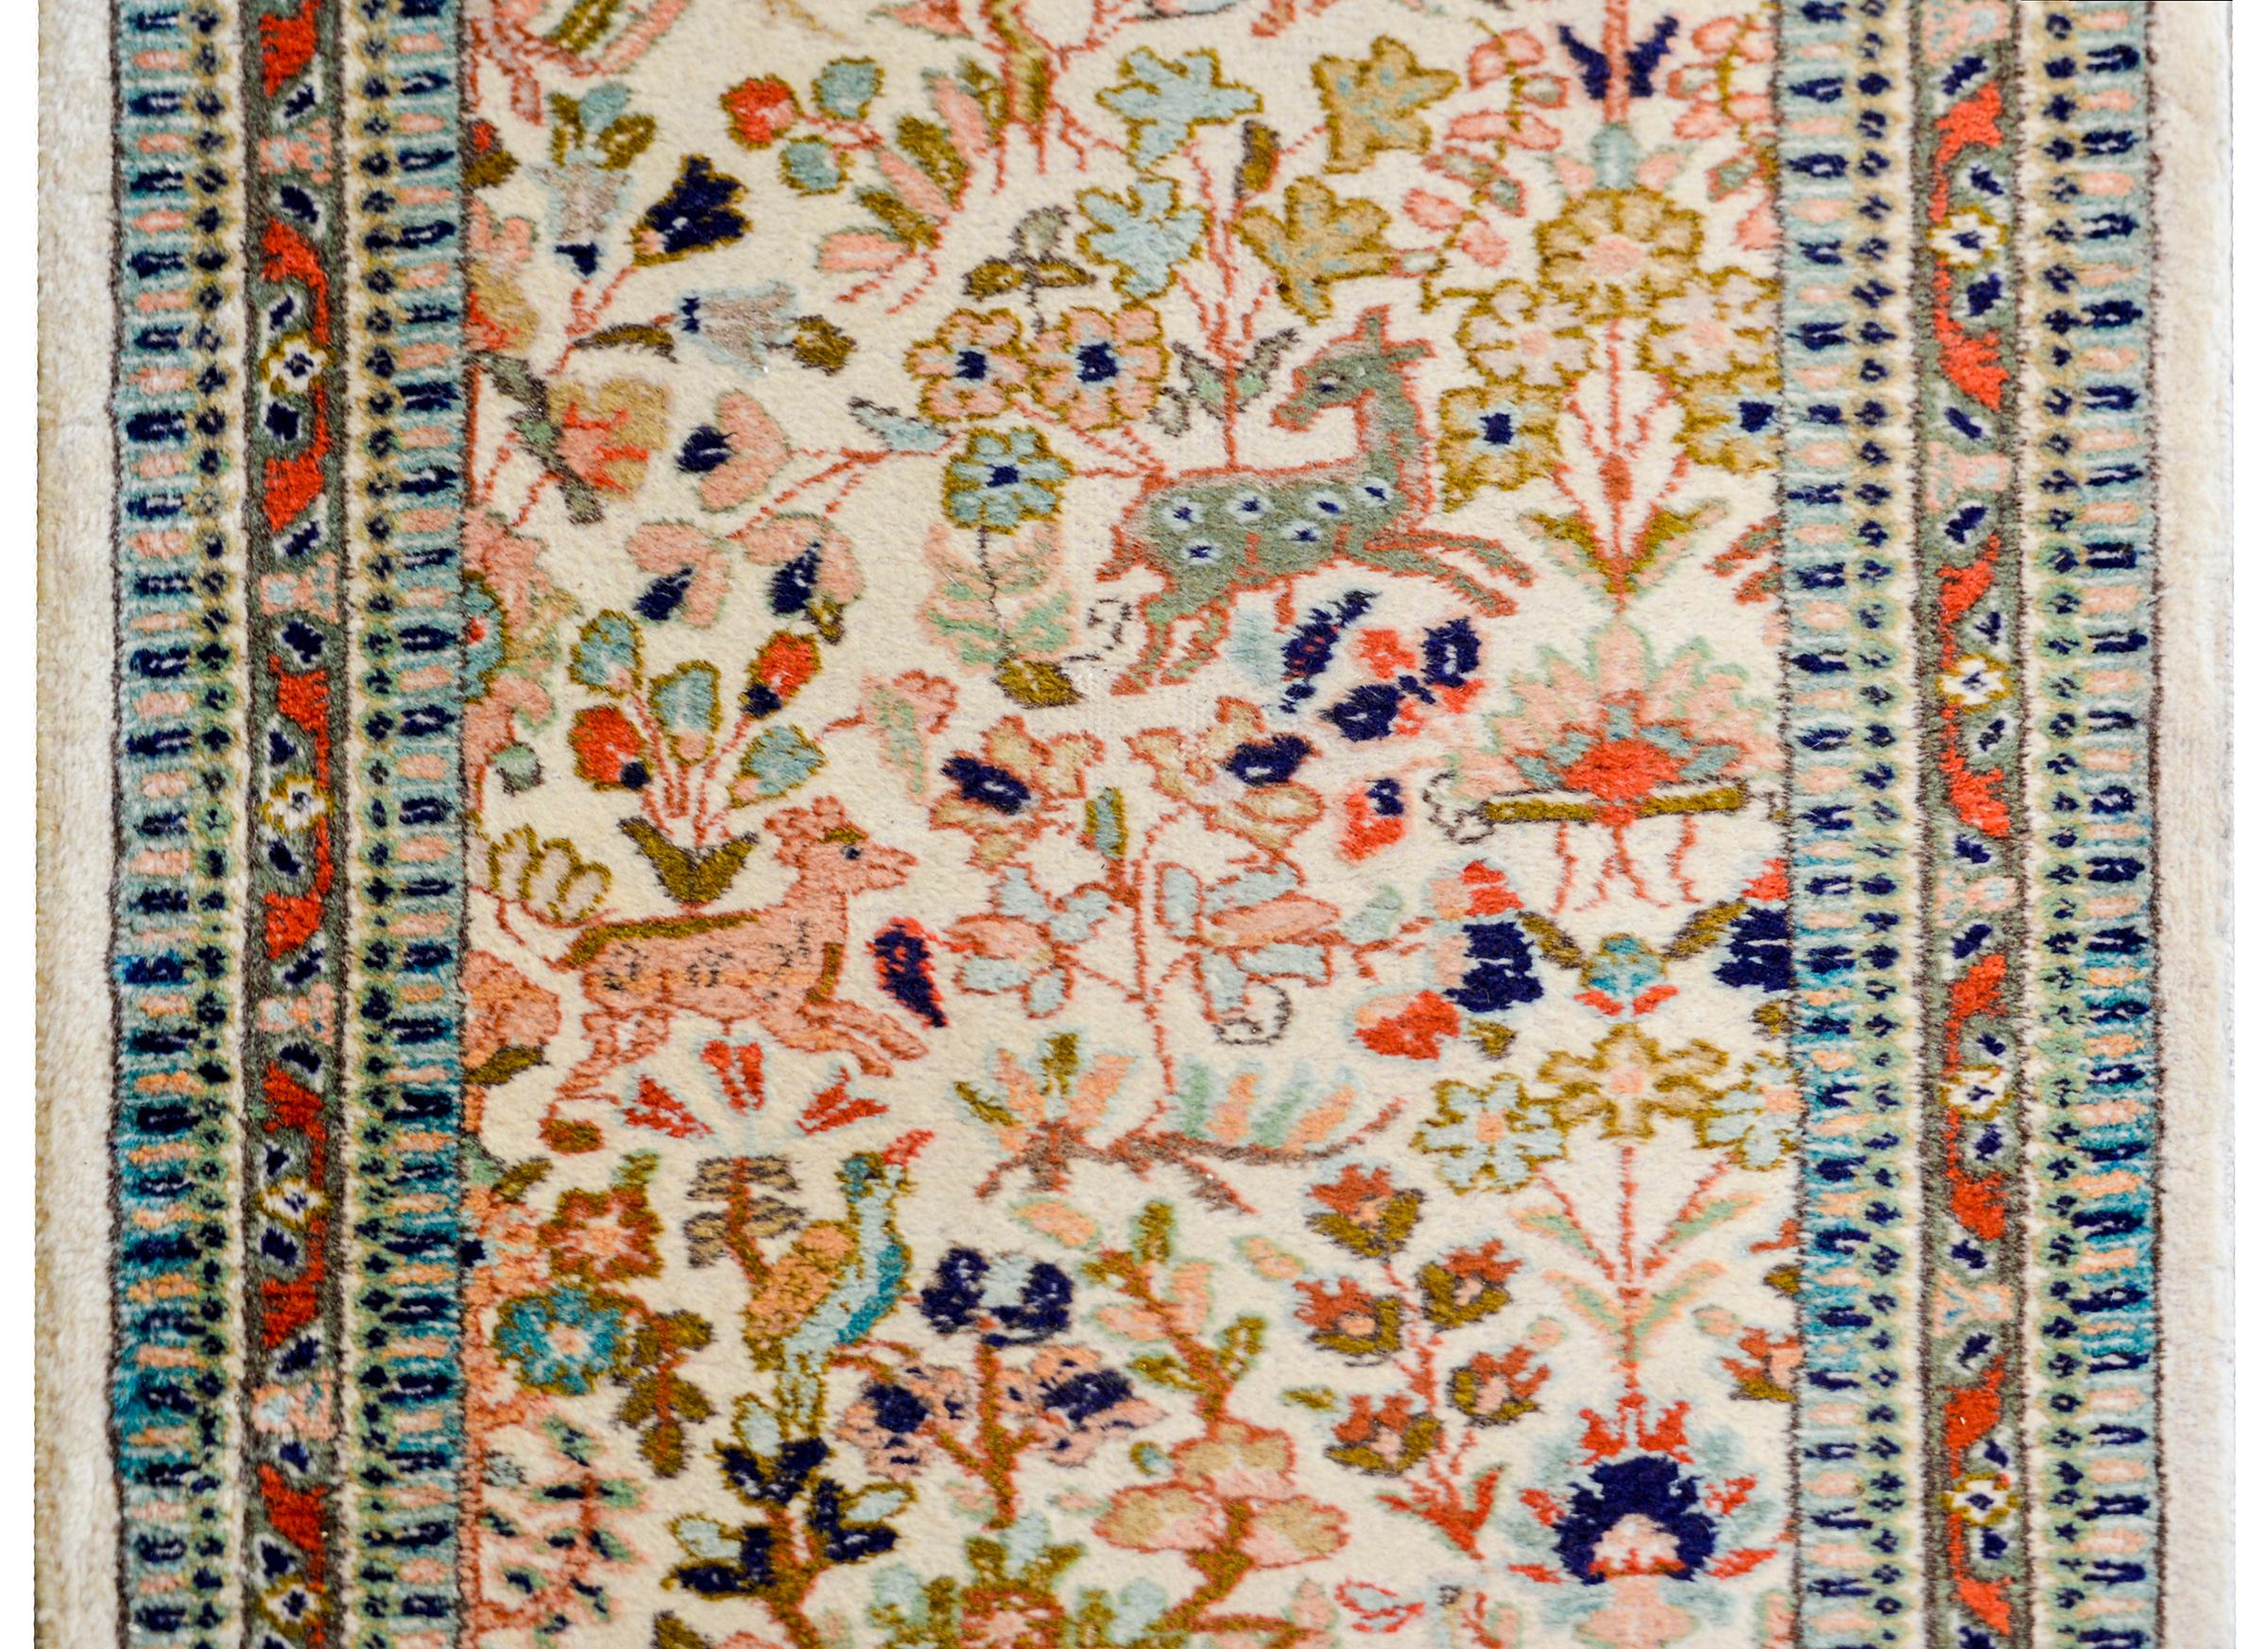 A whimsical early 20th century Persian Tabriz runner with a fantastic pattern containing all-over myriad flowers and trees, with myriad animals including deer and birds, woven in pink, green, light and dark indigo, and crimson, on a white wool